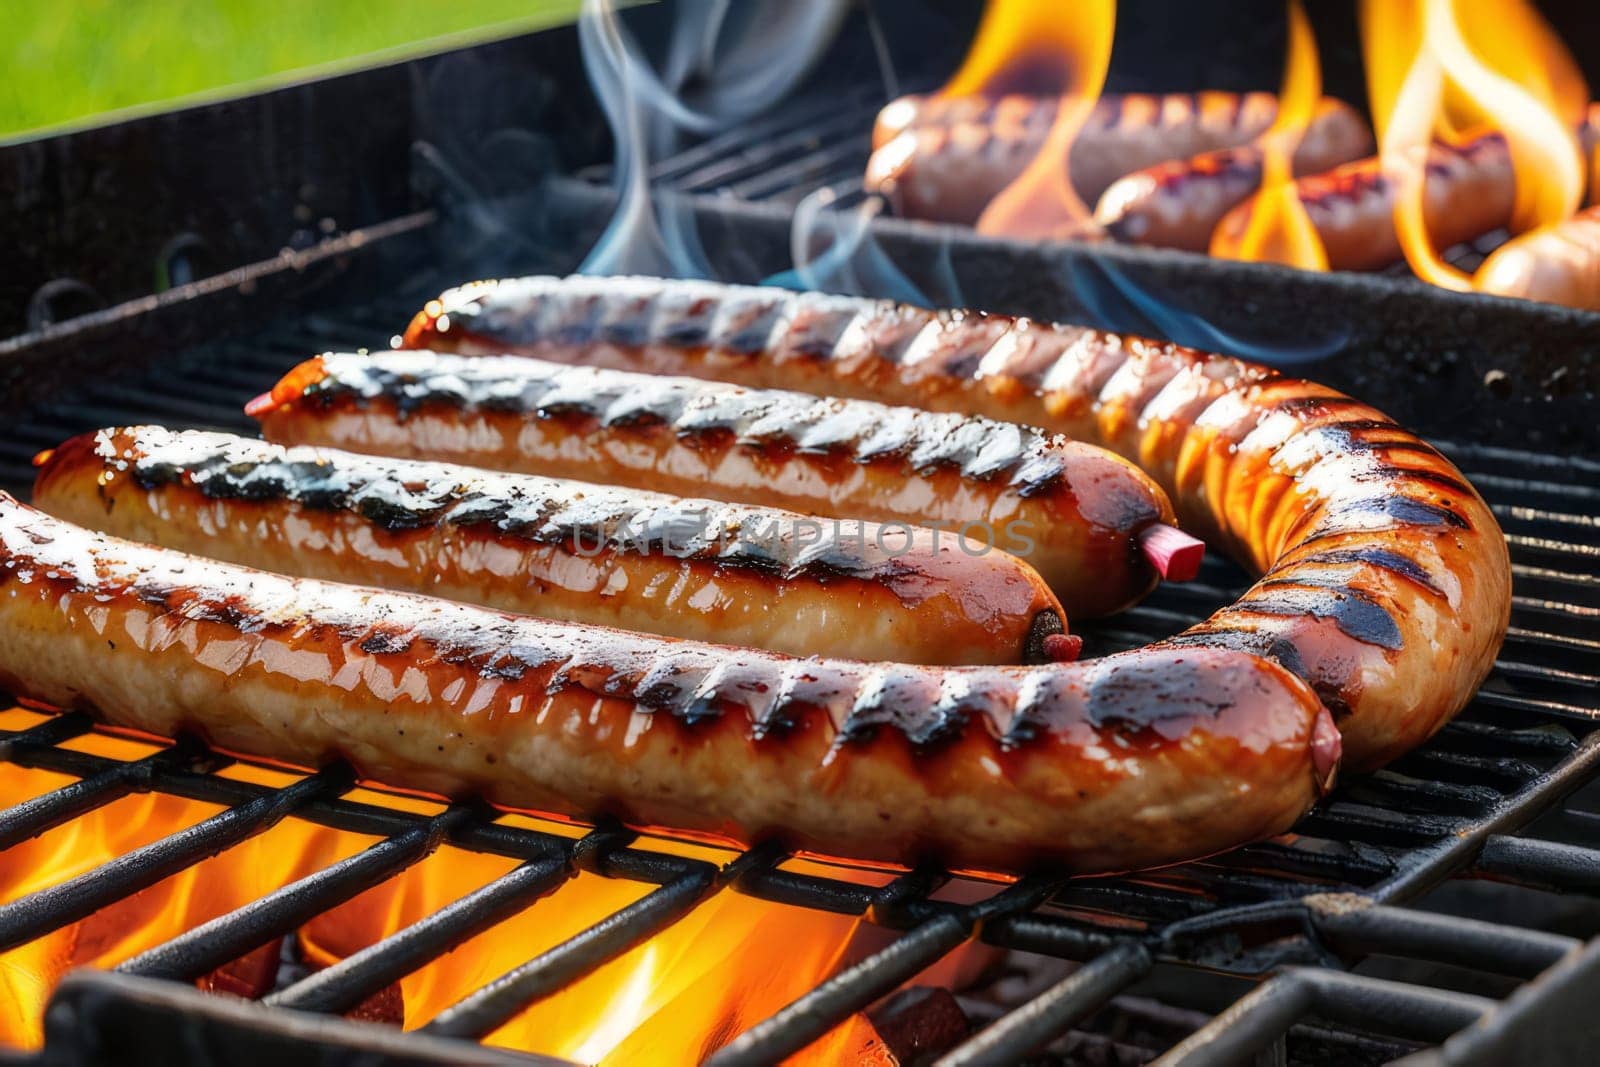 Grilled juicy sausages on grill with fire and shallow depth of field.